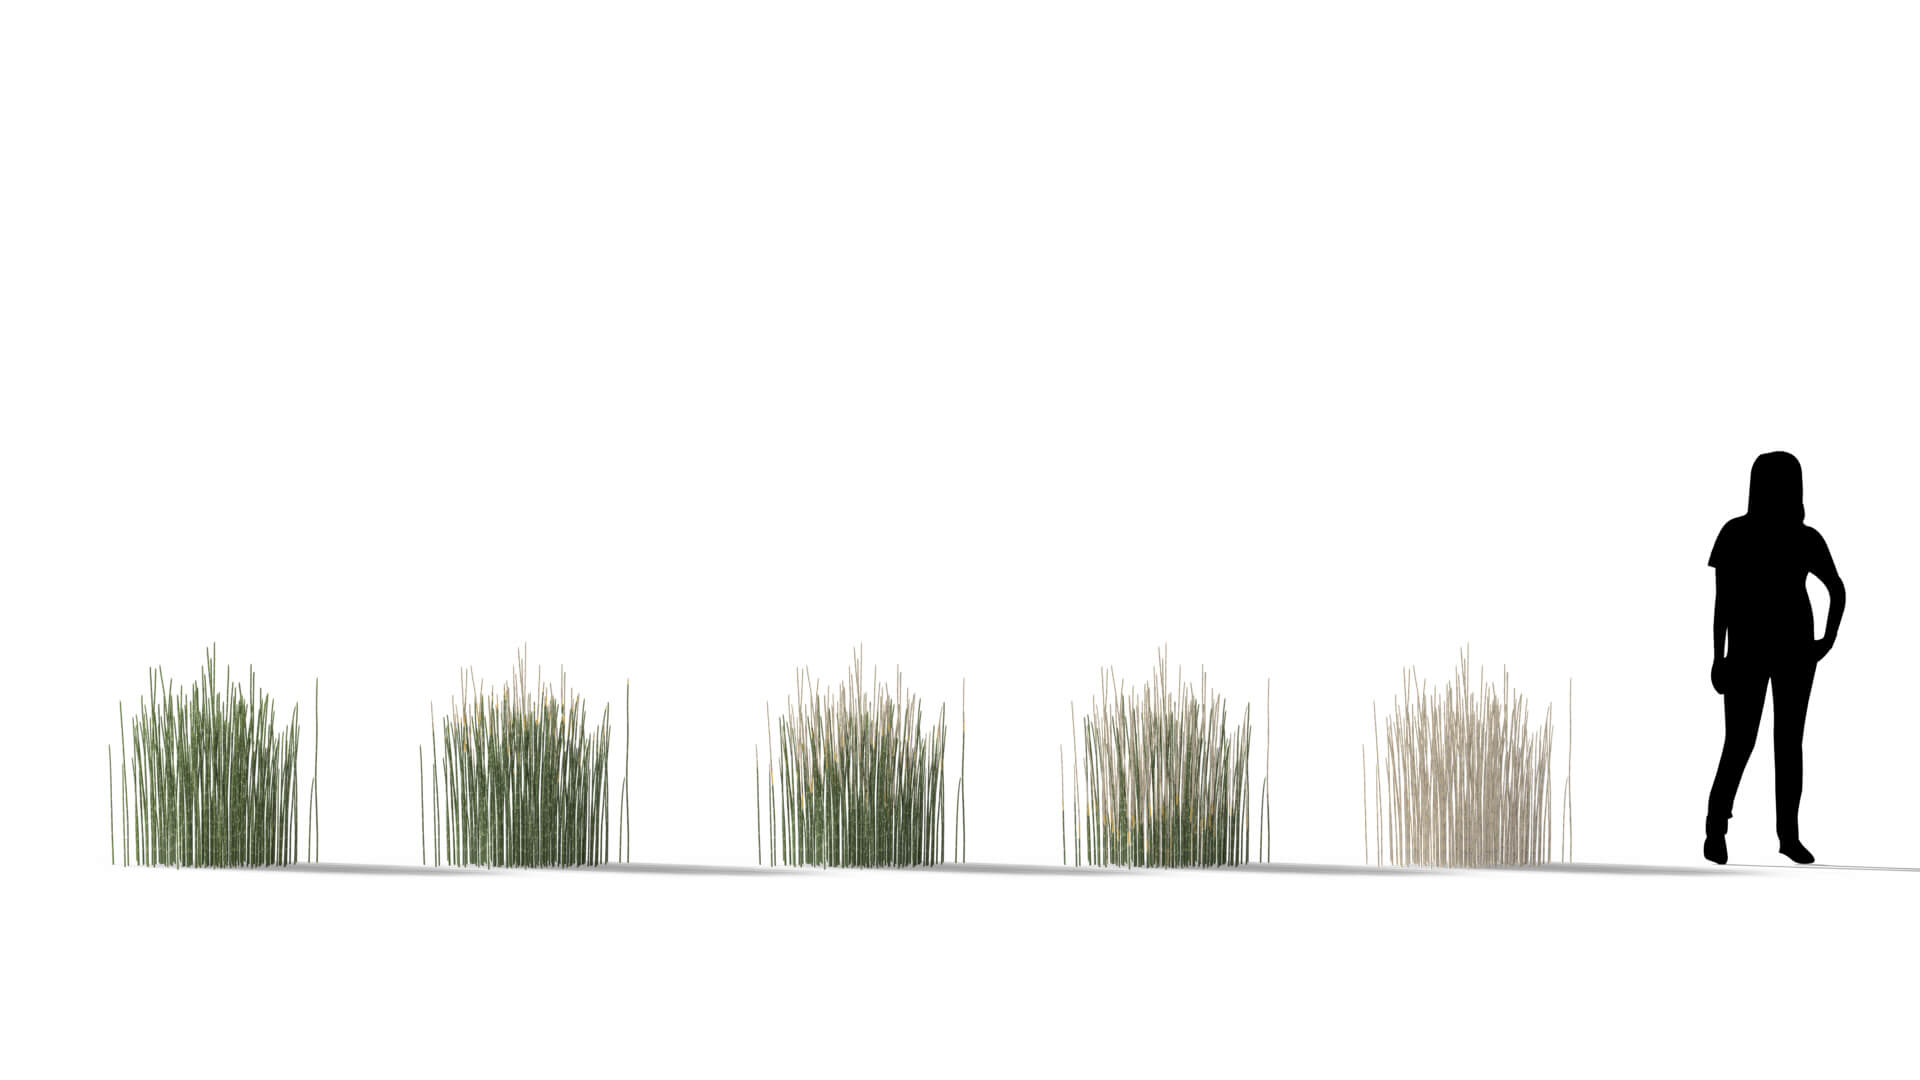 3D model of the Scouring rush Equisetum hyemale health variations